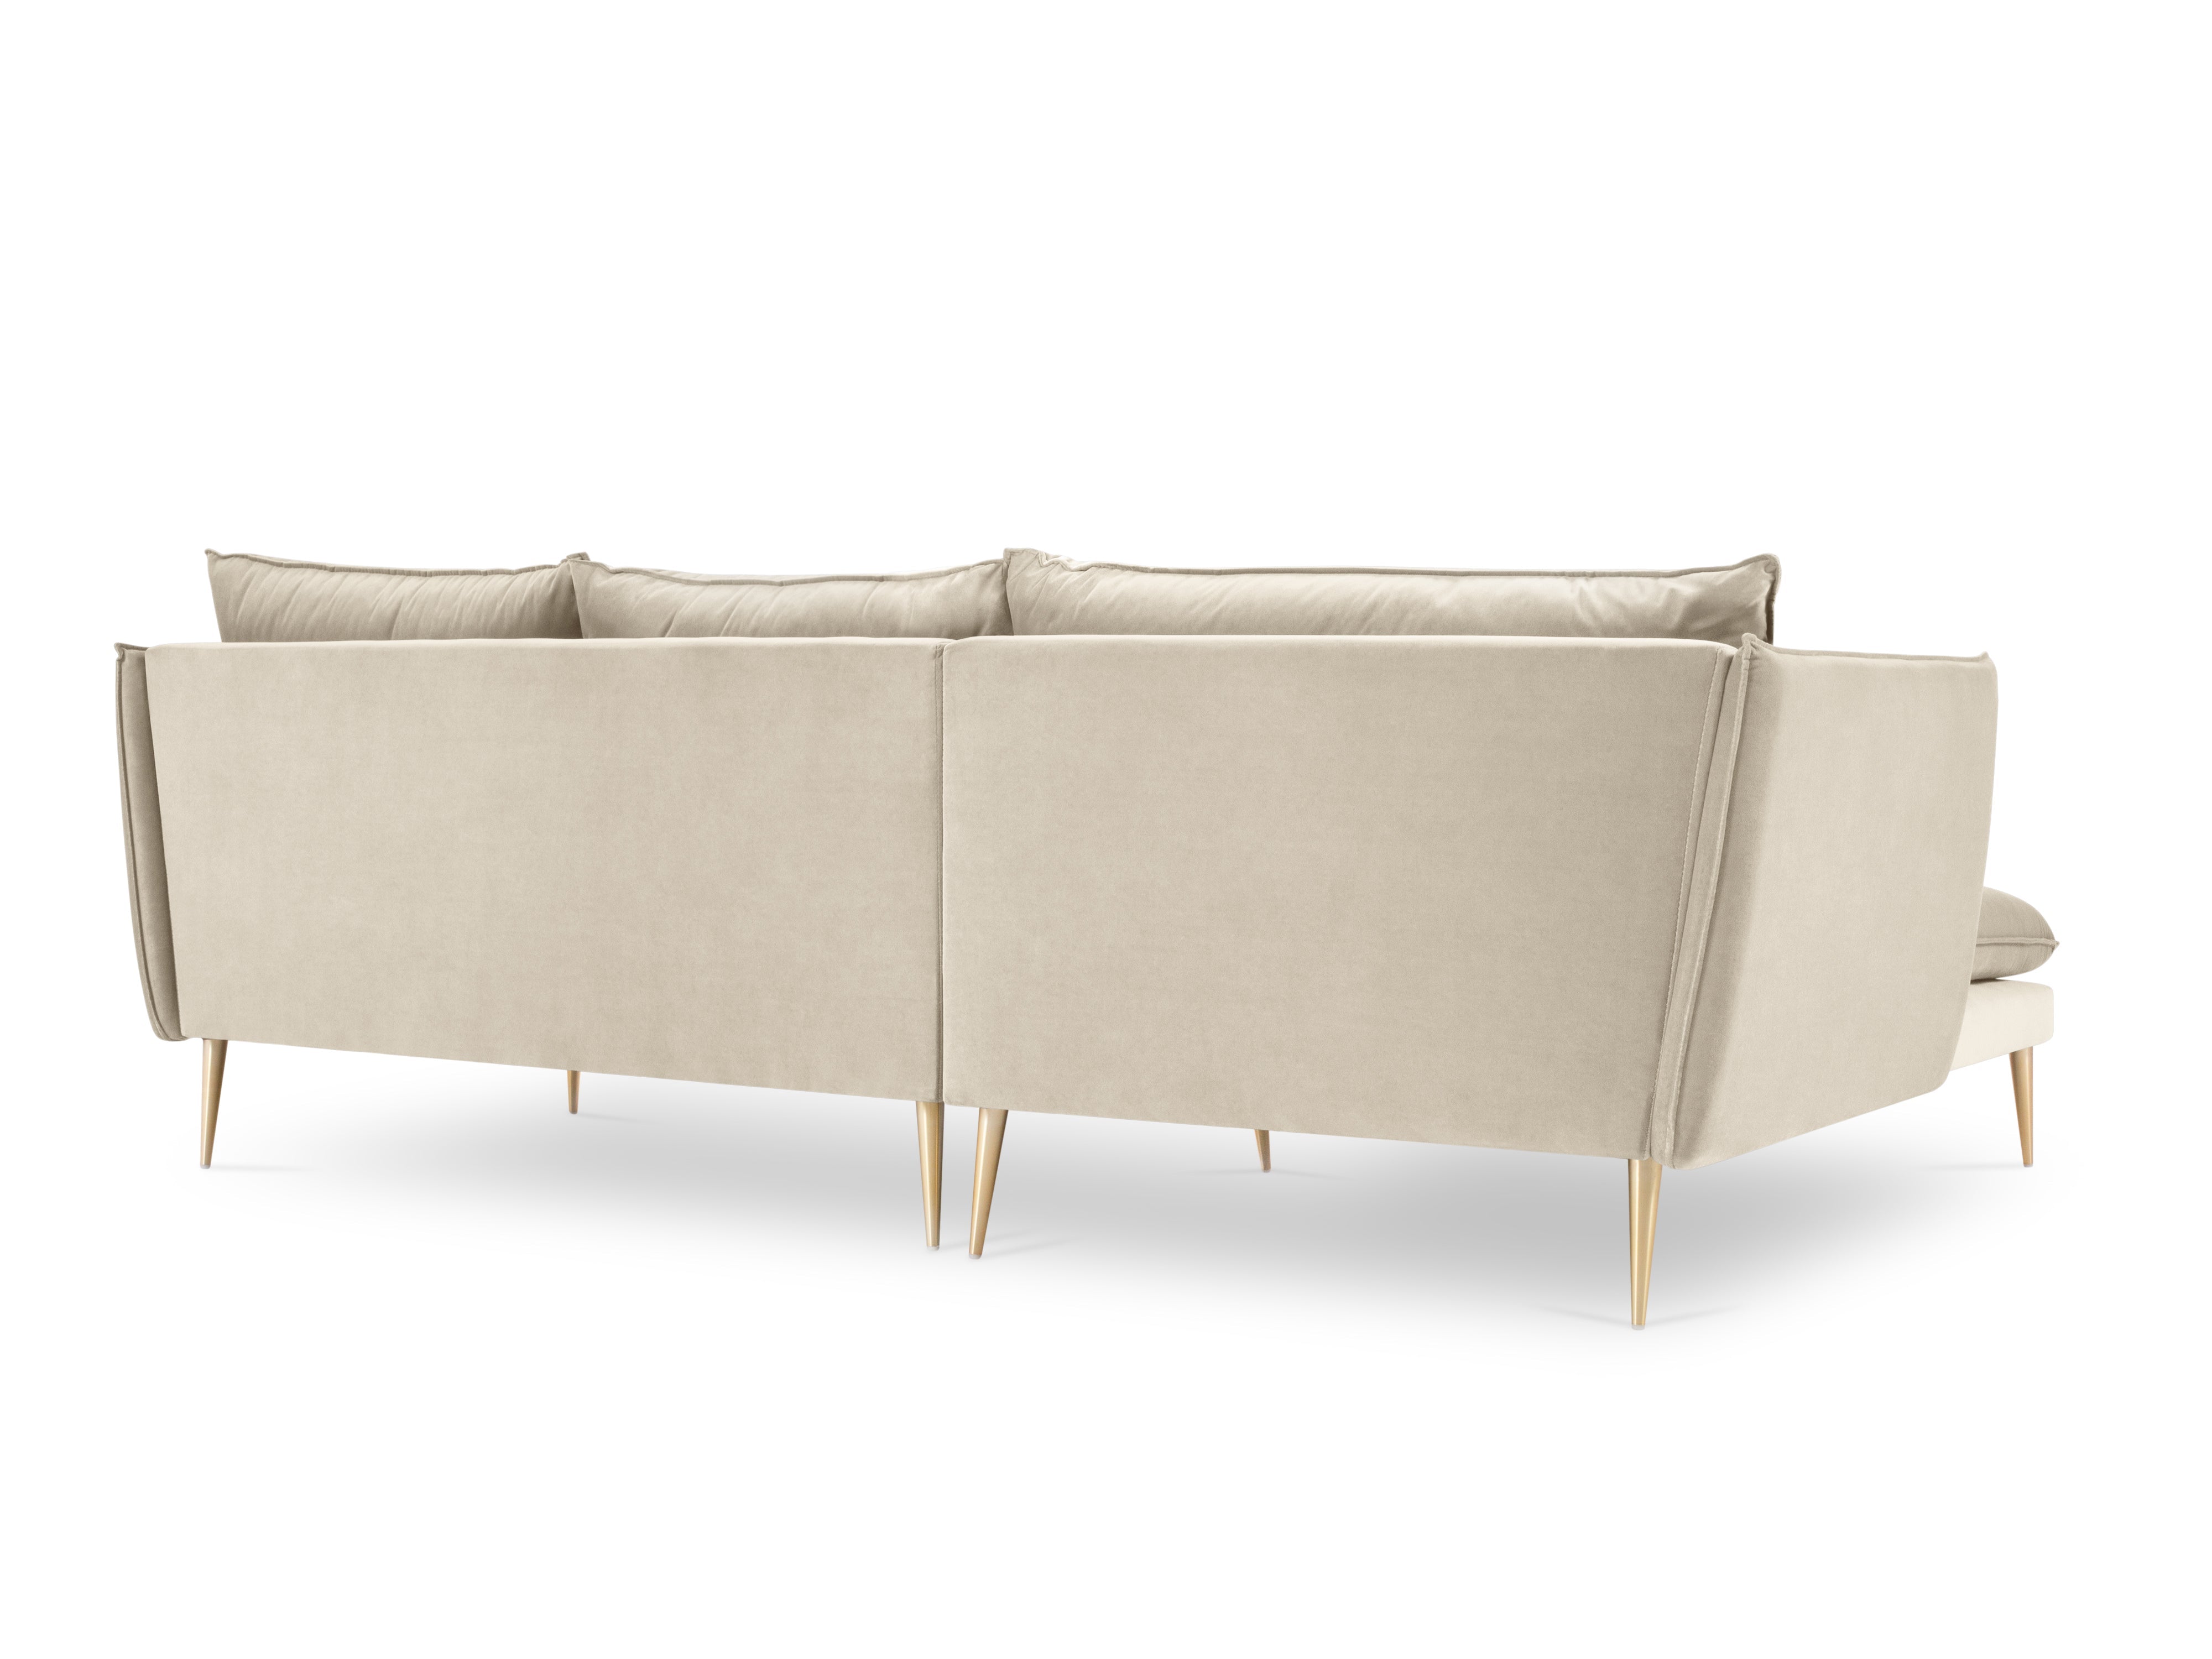 Beige sofa with a golden base